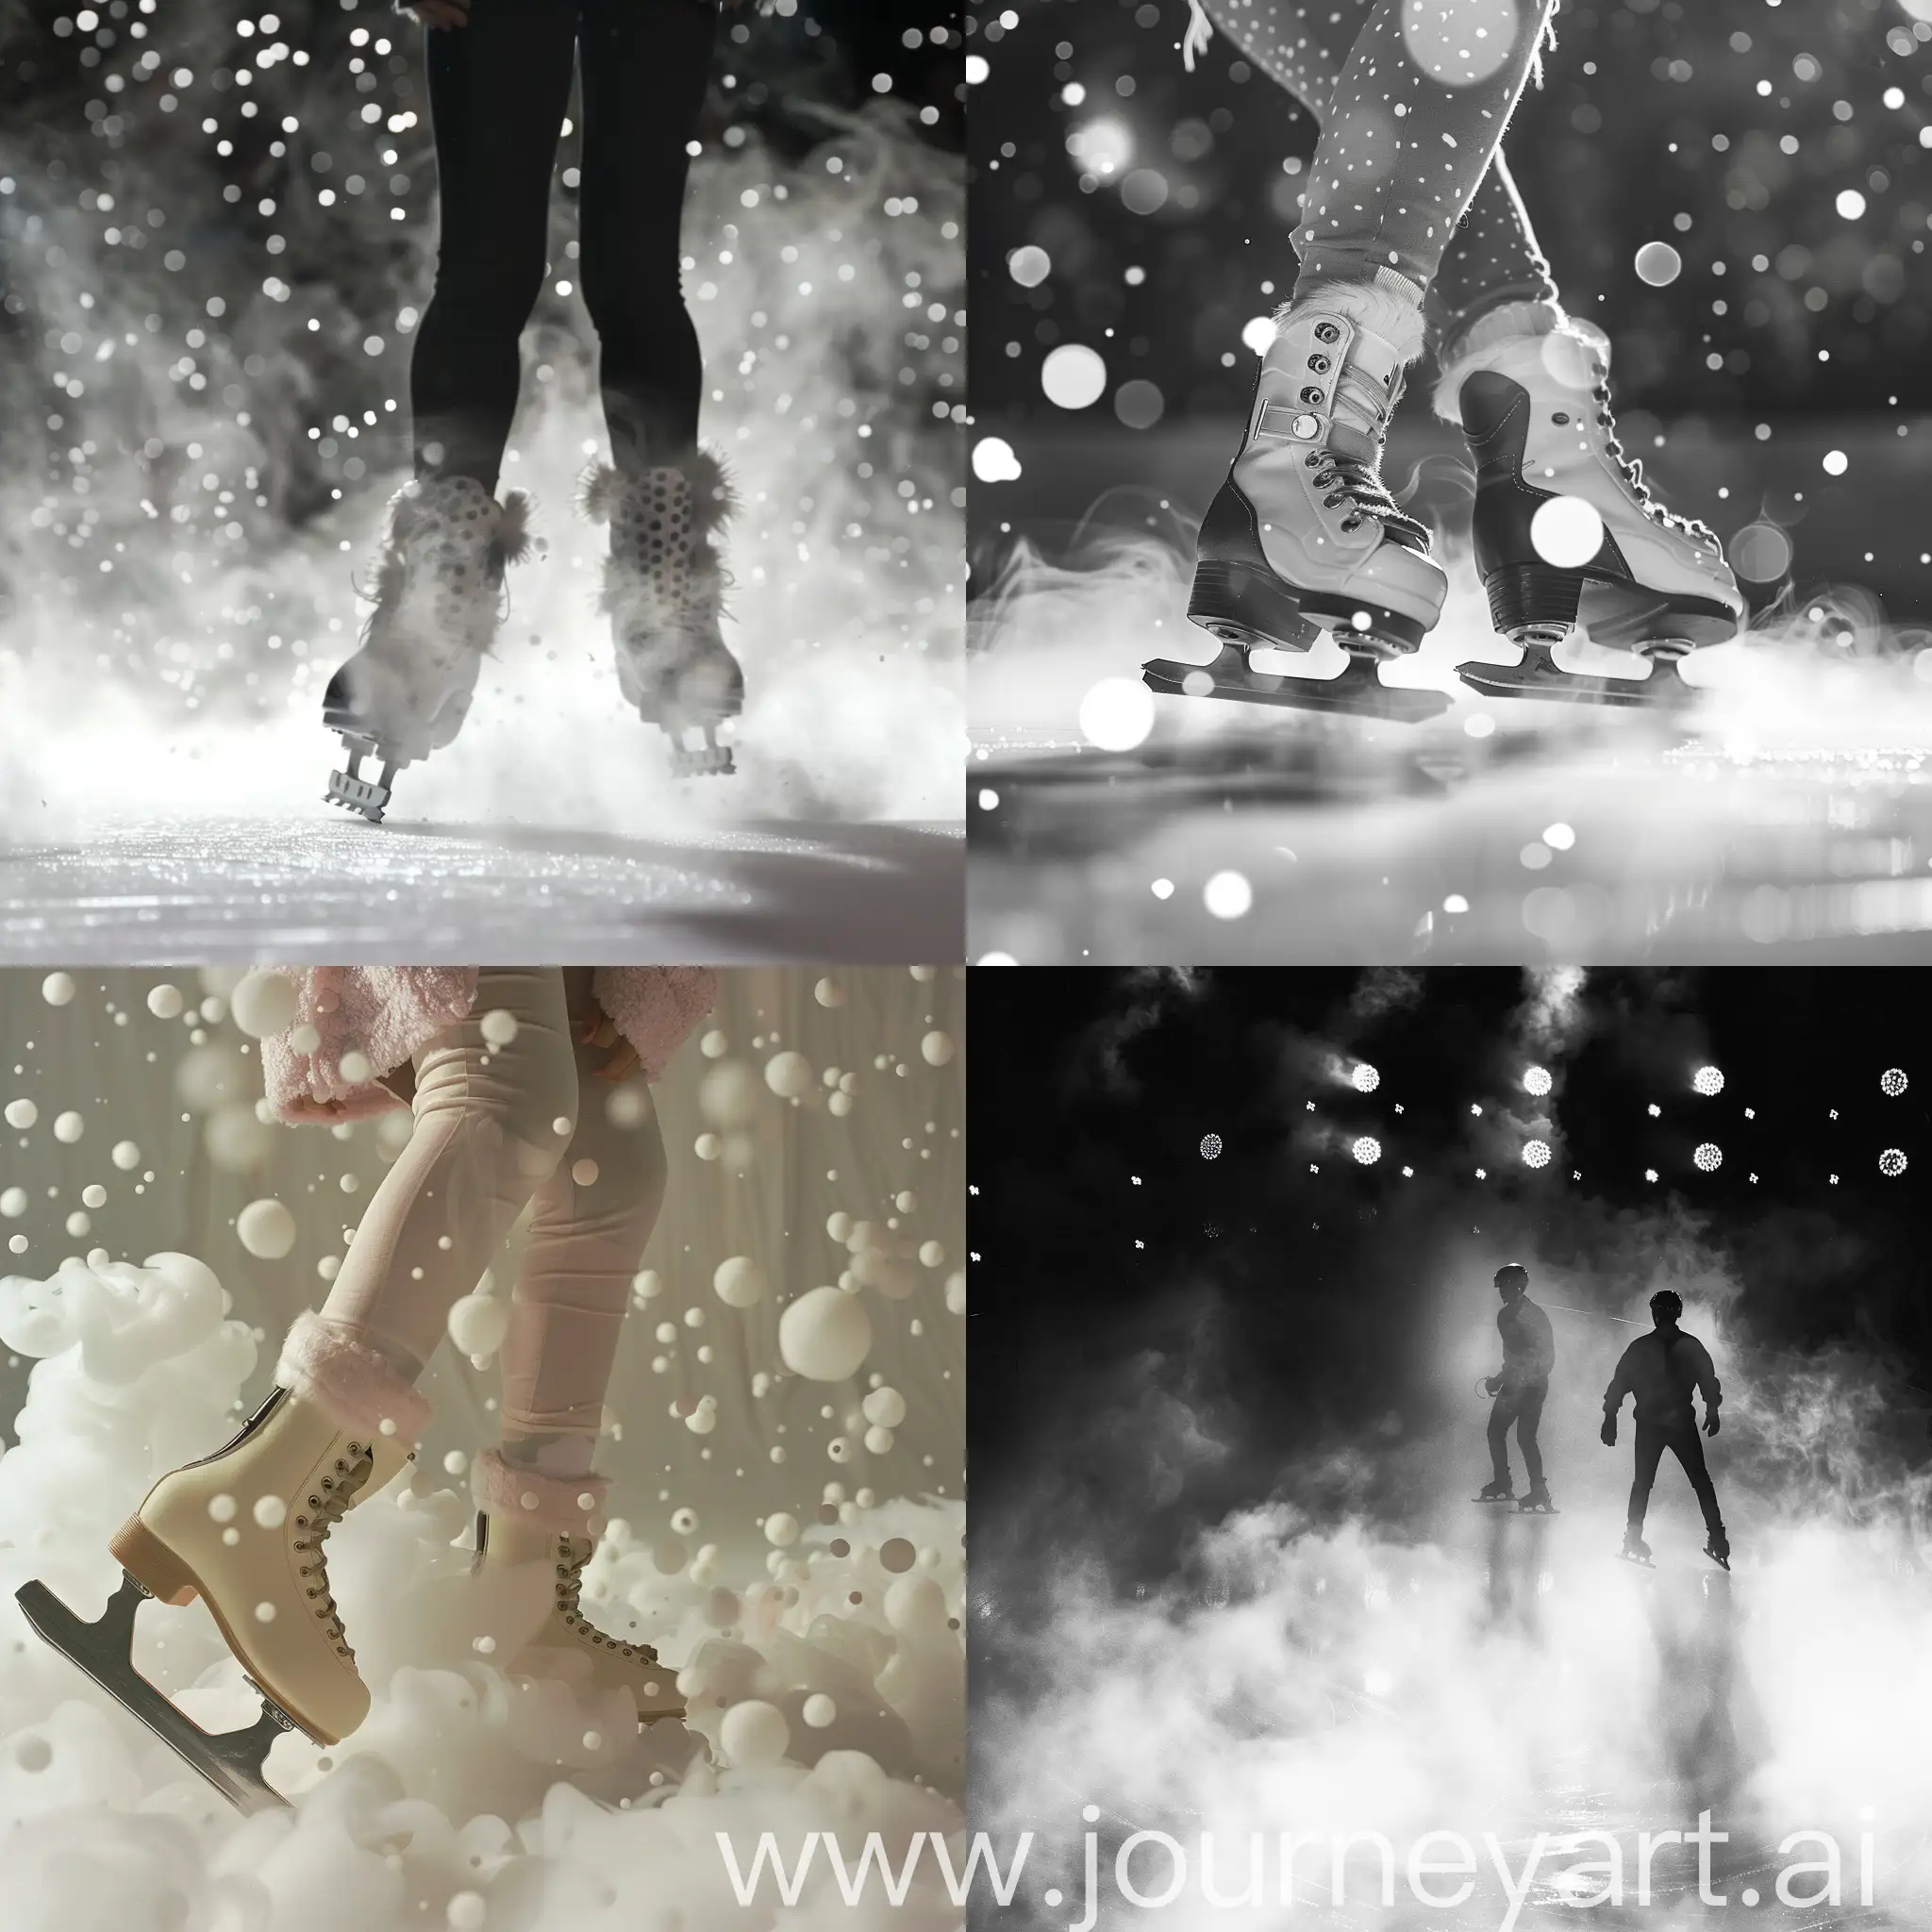 Ice-Skating-Performance-Amidst-Smoke-and-White-Dots